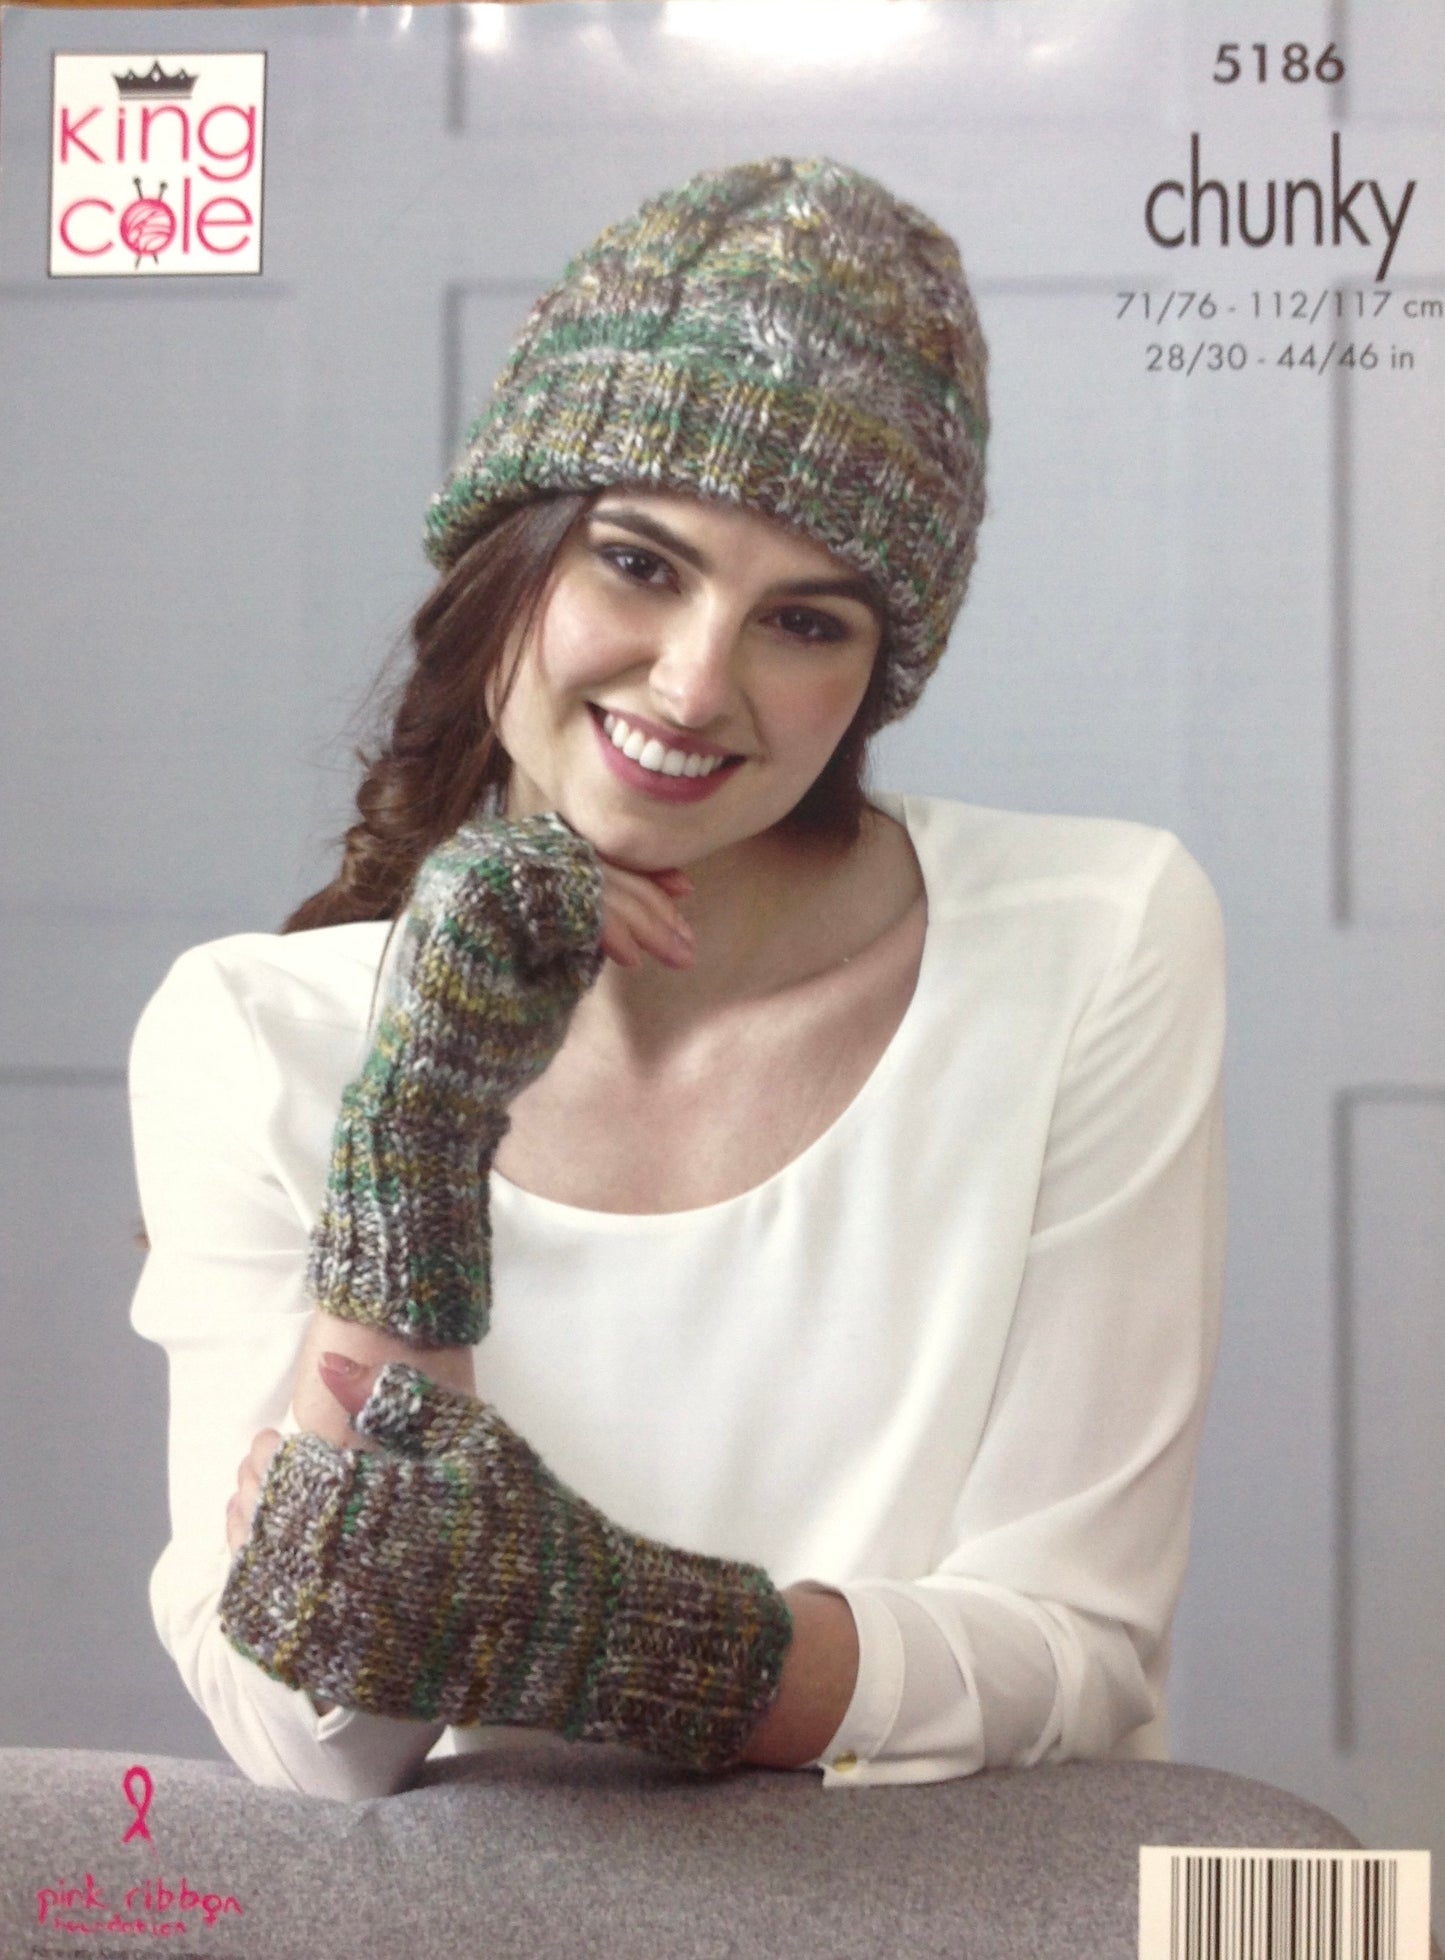 5186 King Cole Chunky Ladies Sweater, Hat and Fingerless Mittens Knitting Pattern